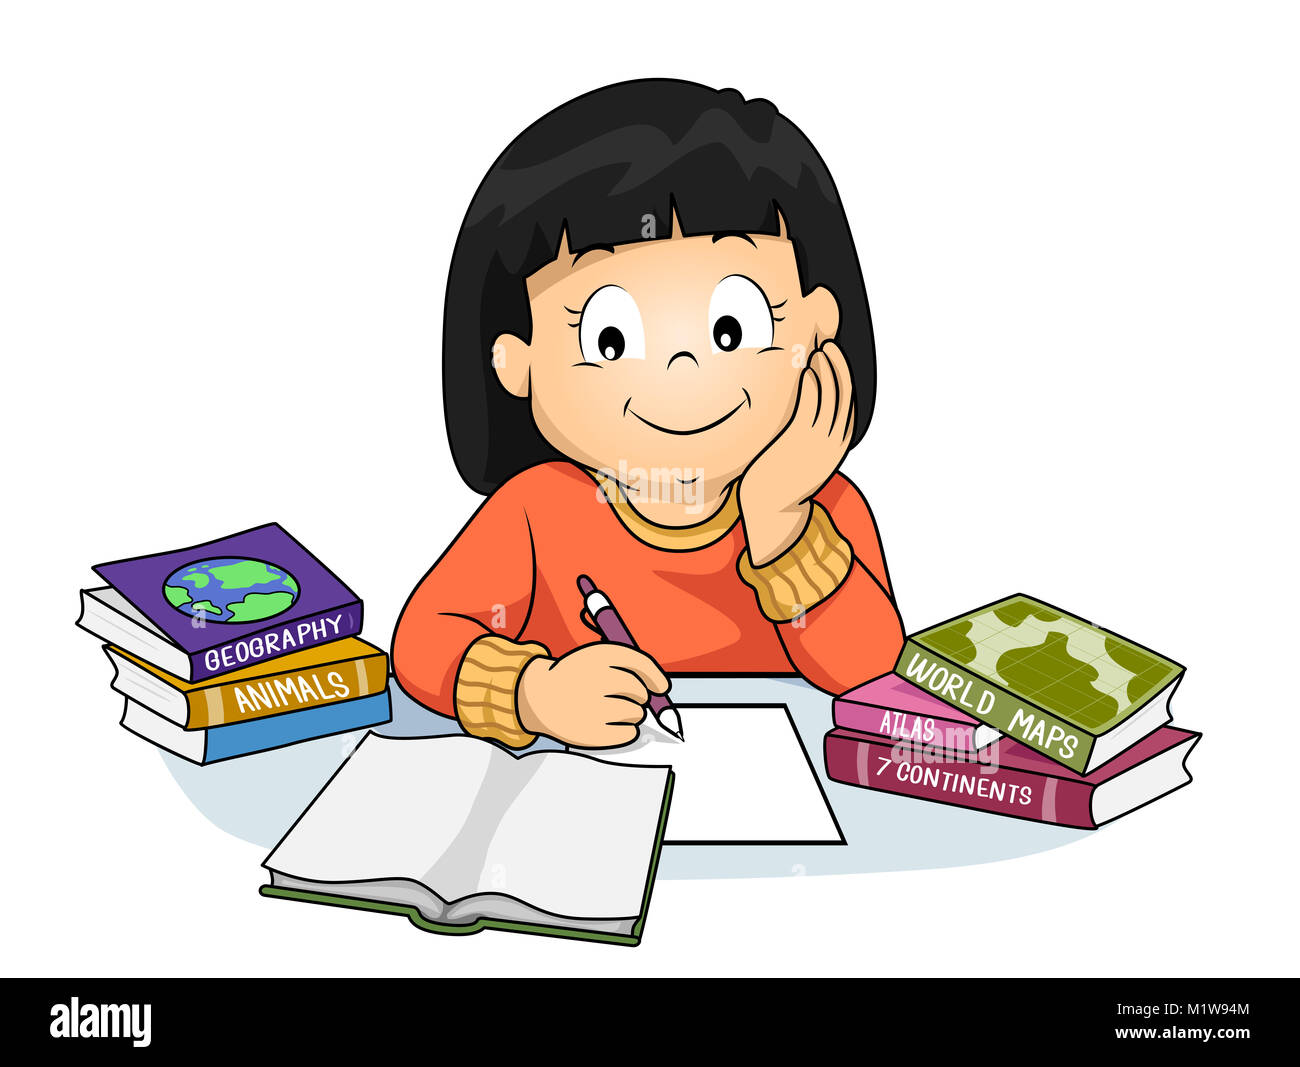 Illustration of a Kid Girl Doing her Homework and Learning about Geography Stock Photo